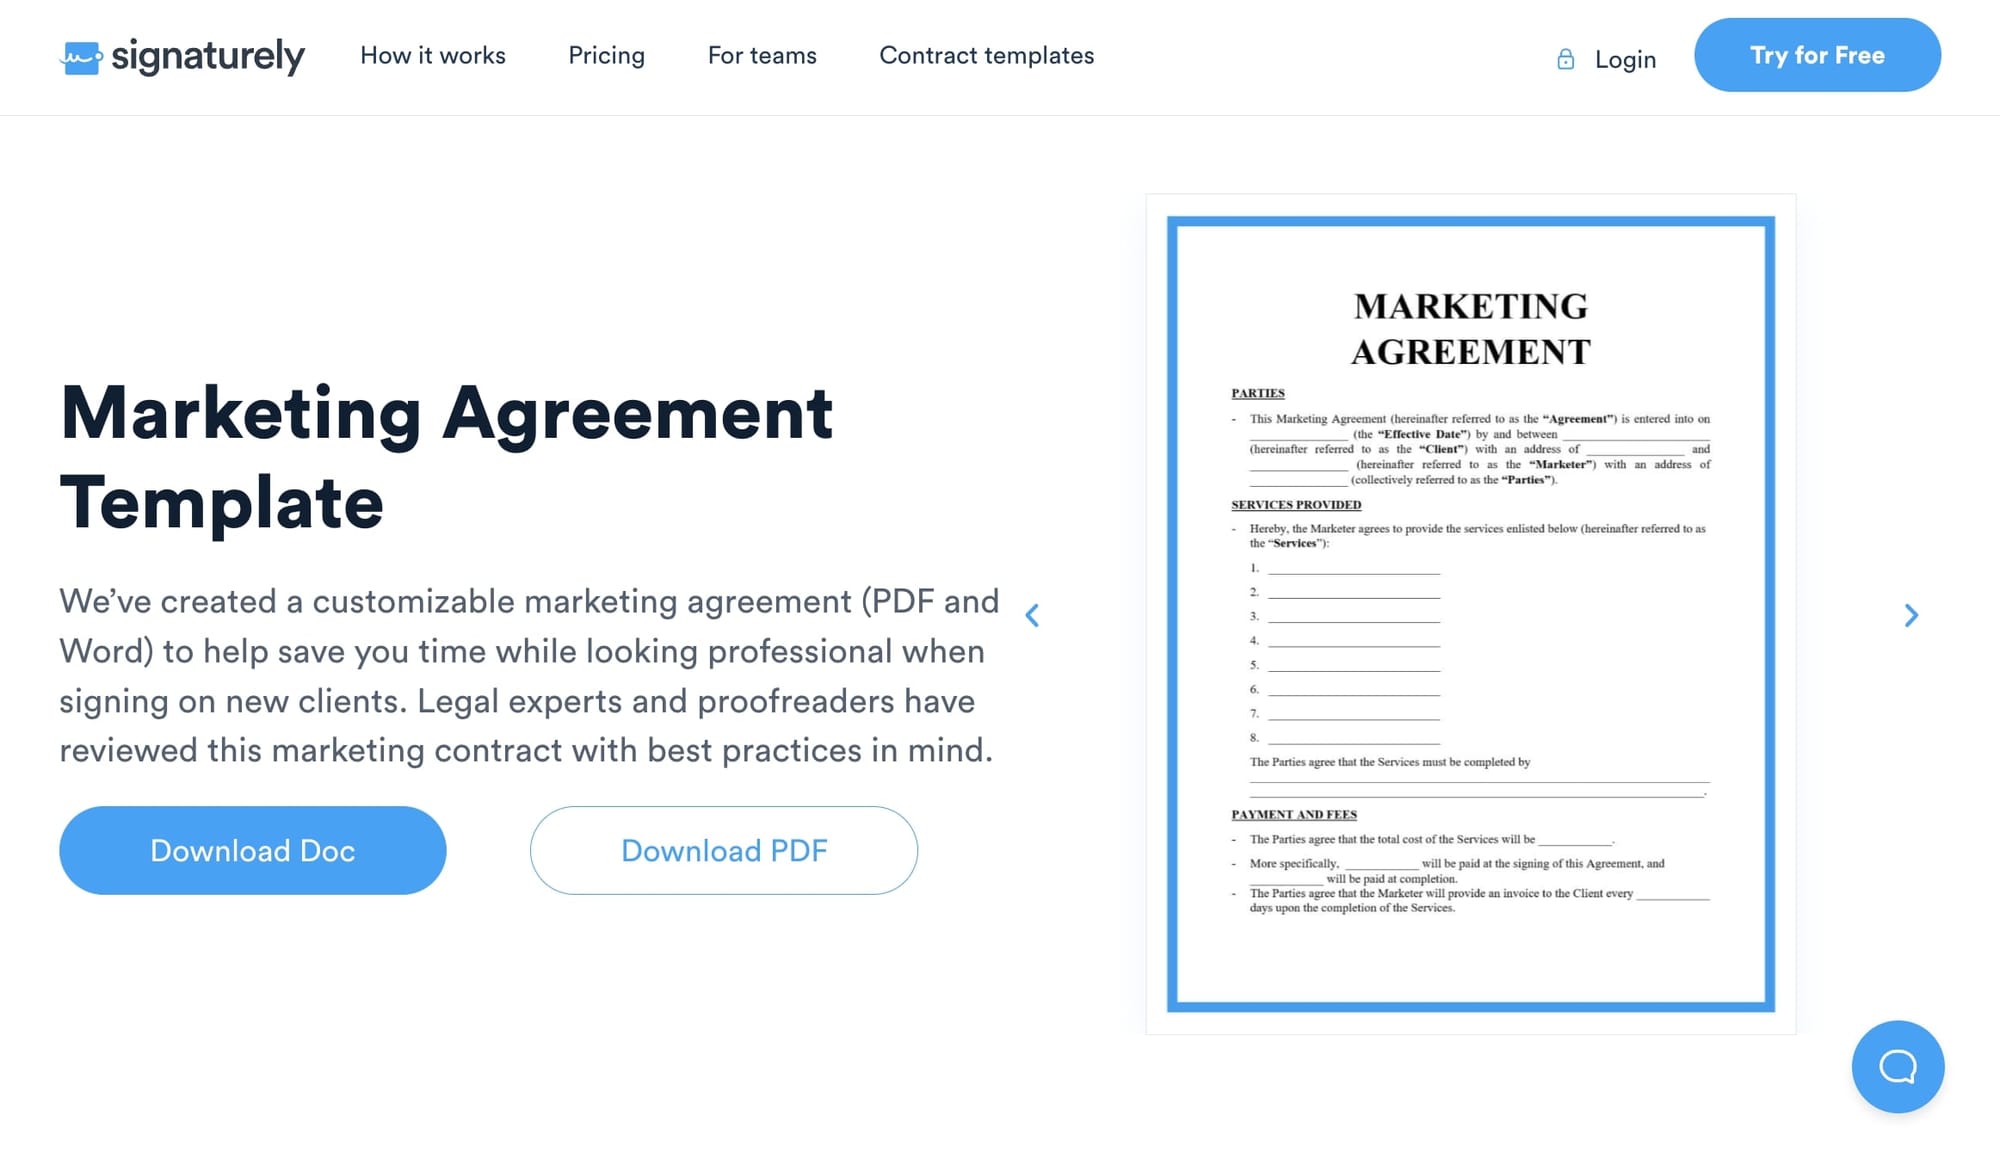 Basic marketing contract template by Signaturely